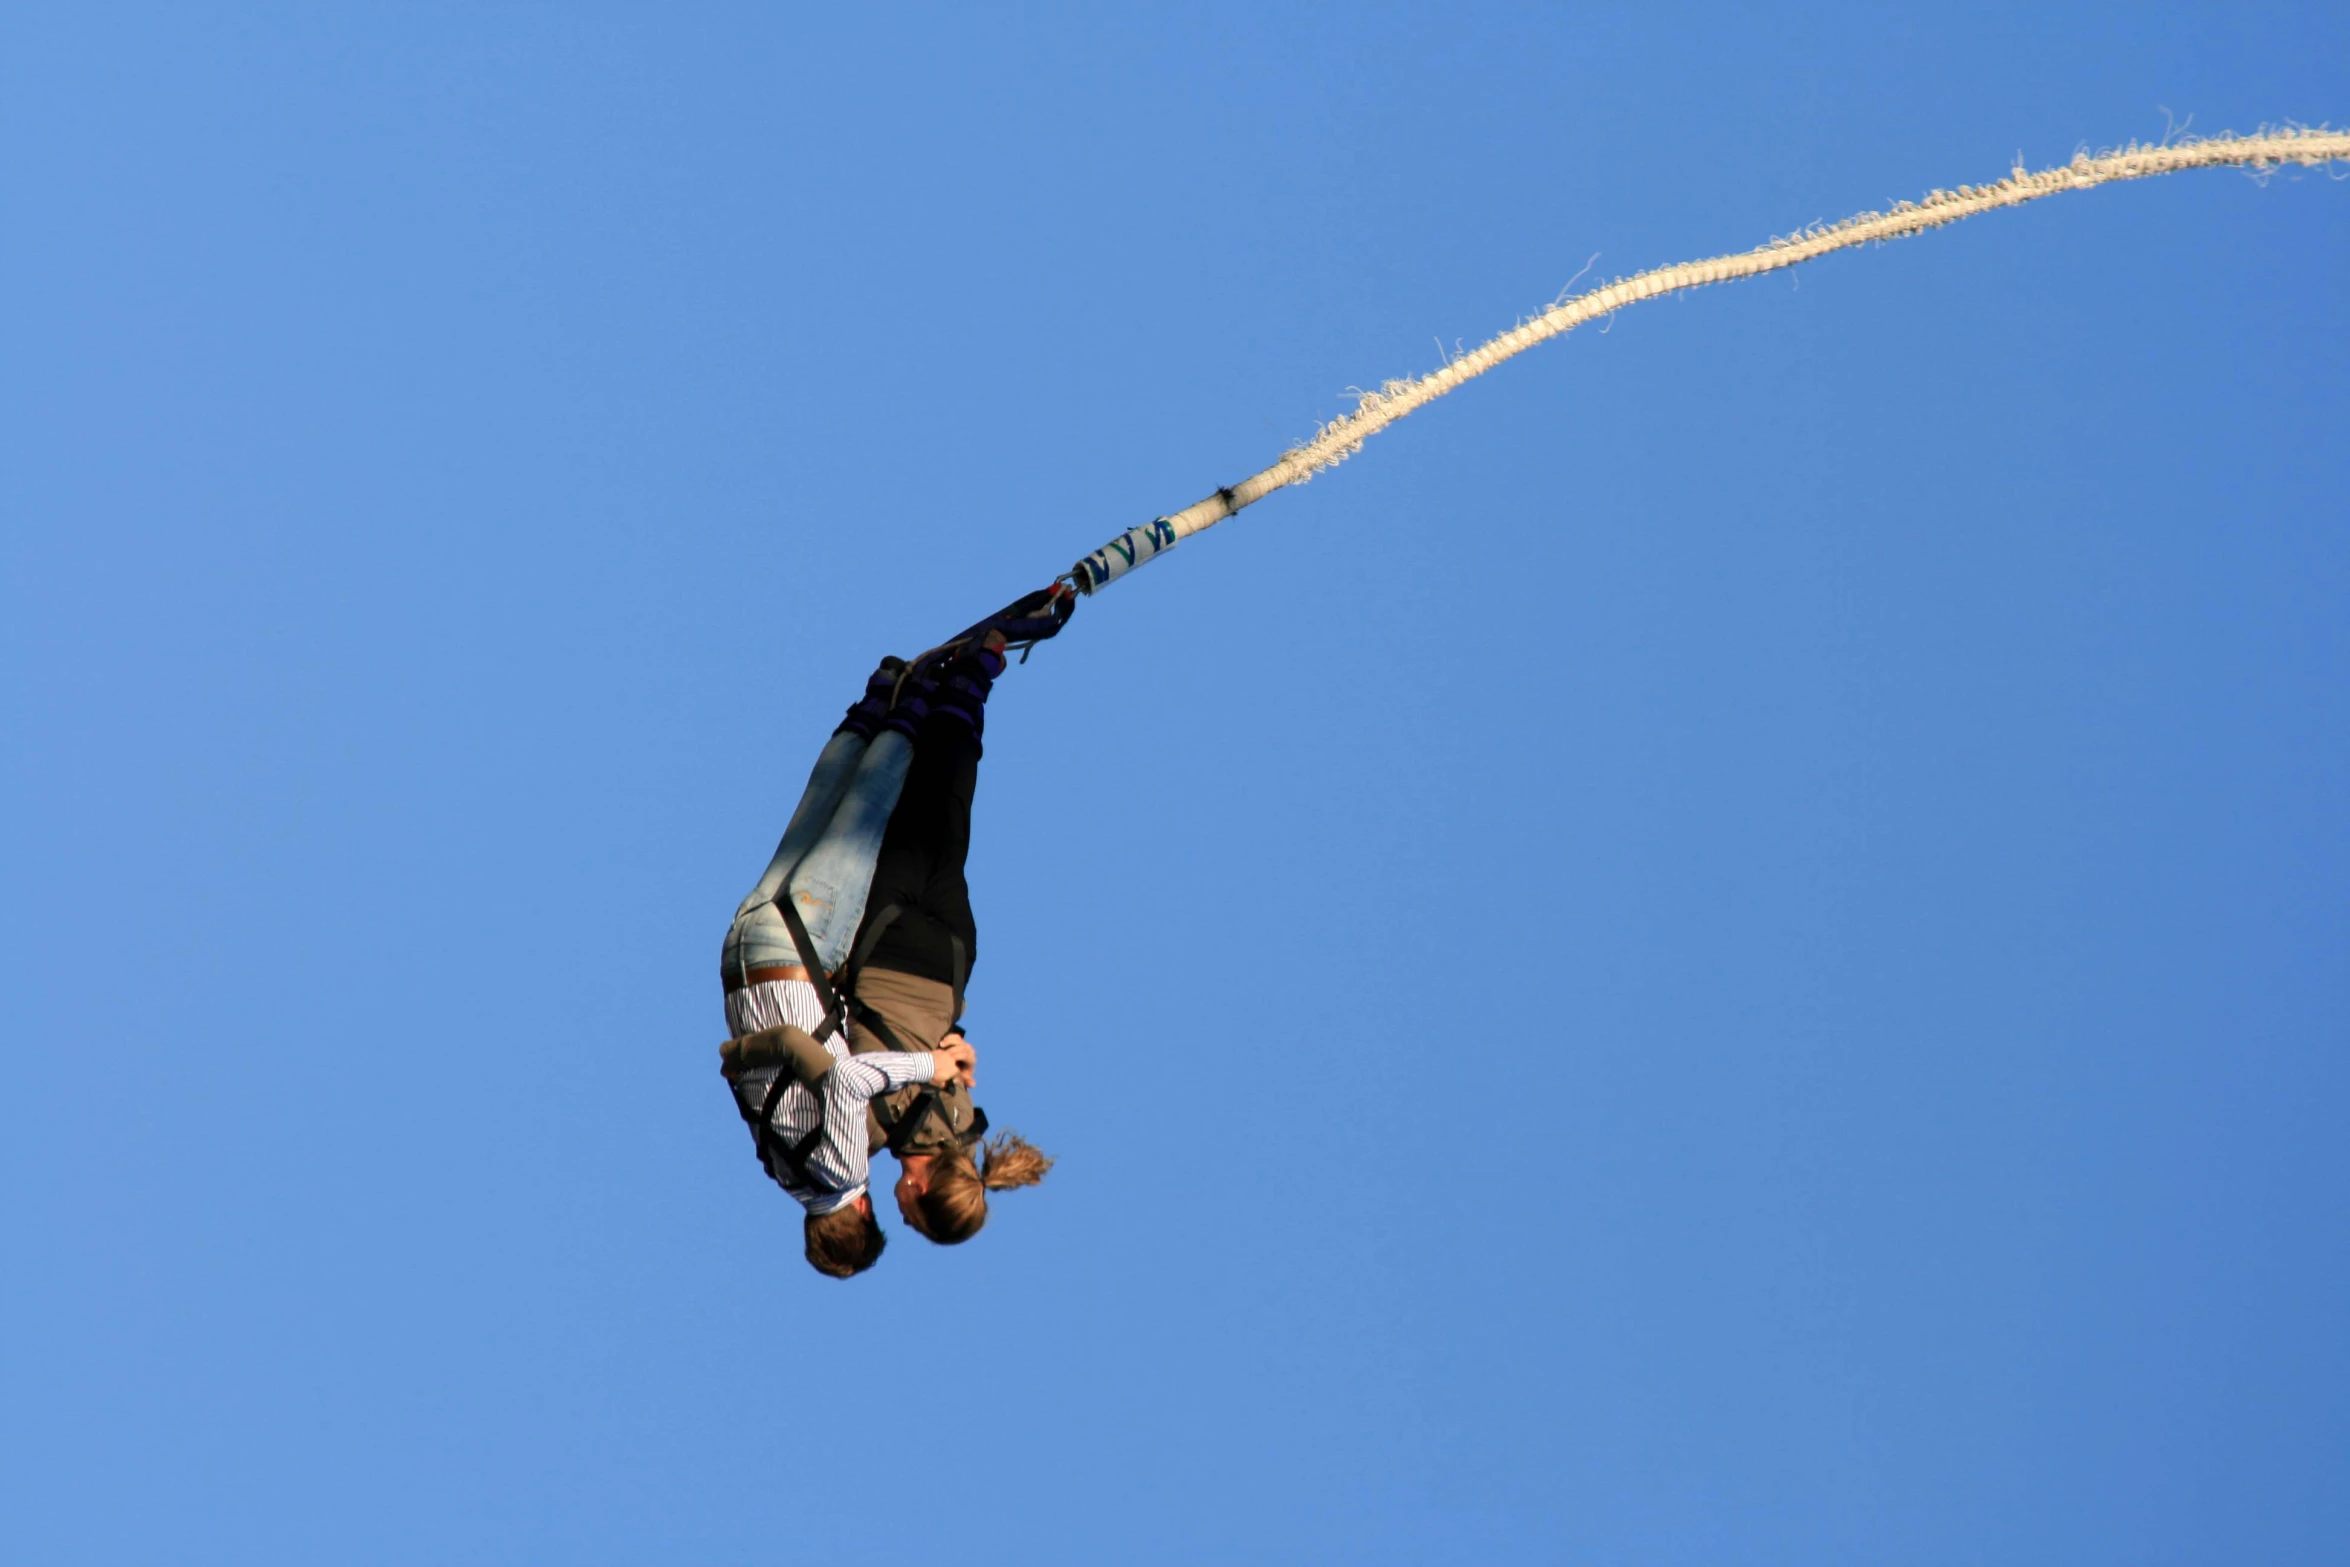 a man flying through the air while suspended from a kite